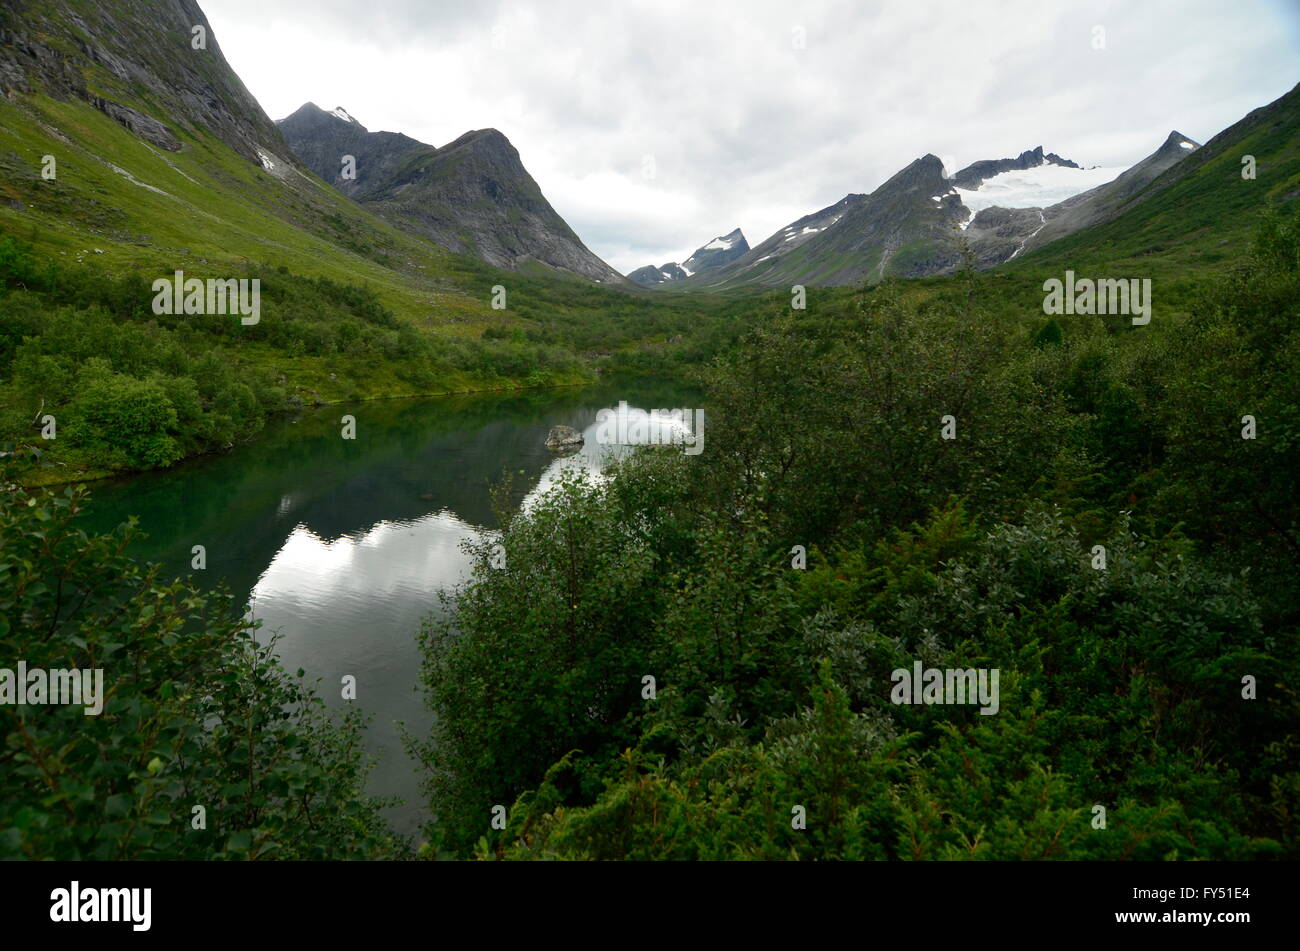 Green Valley under the Glaciers on the way from Patchelytta to Stranda, Norway. Stock Photo